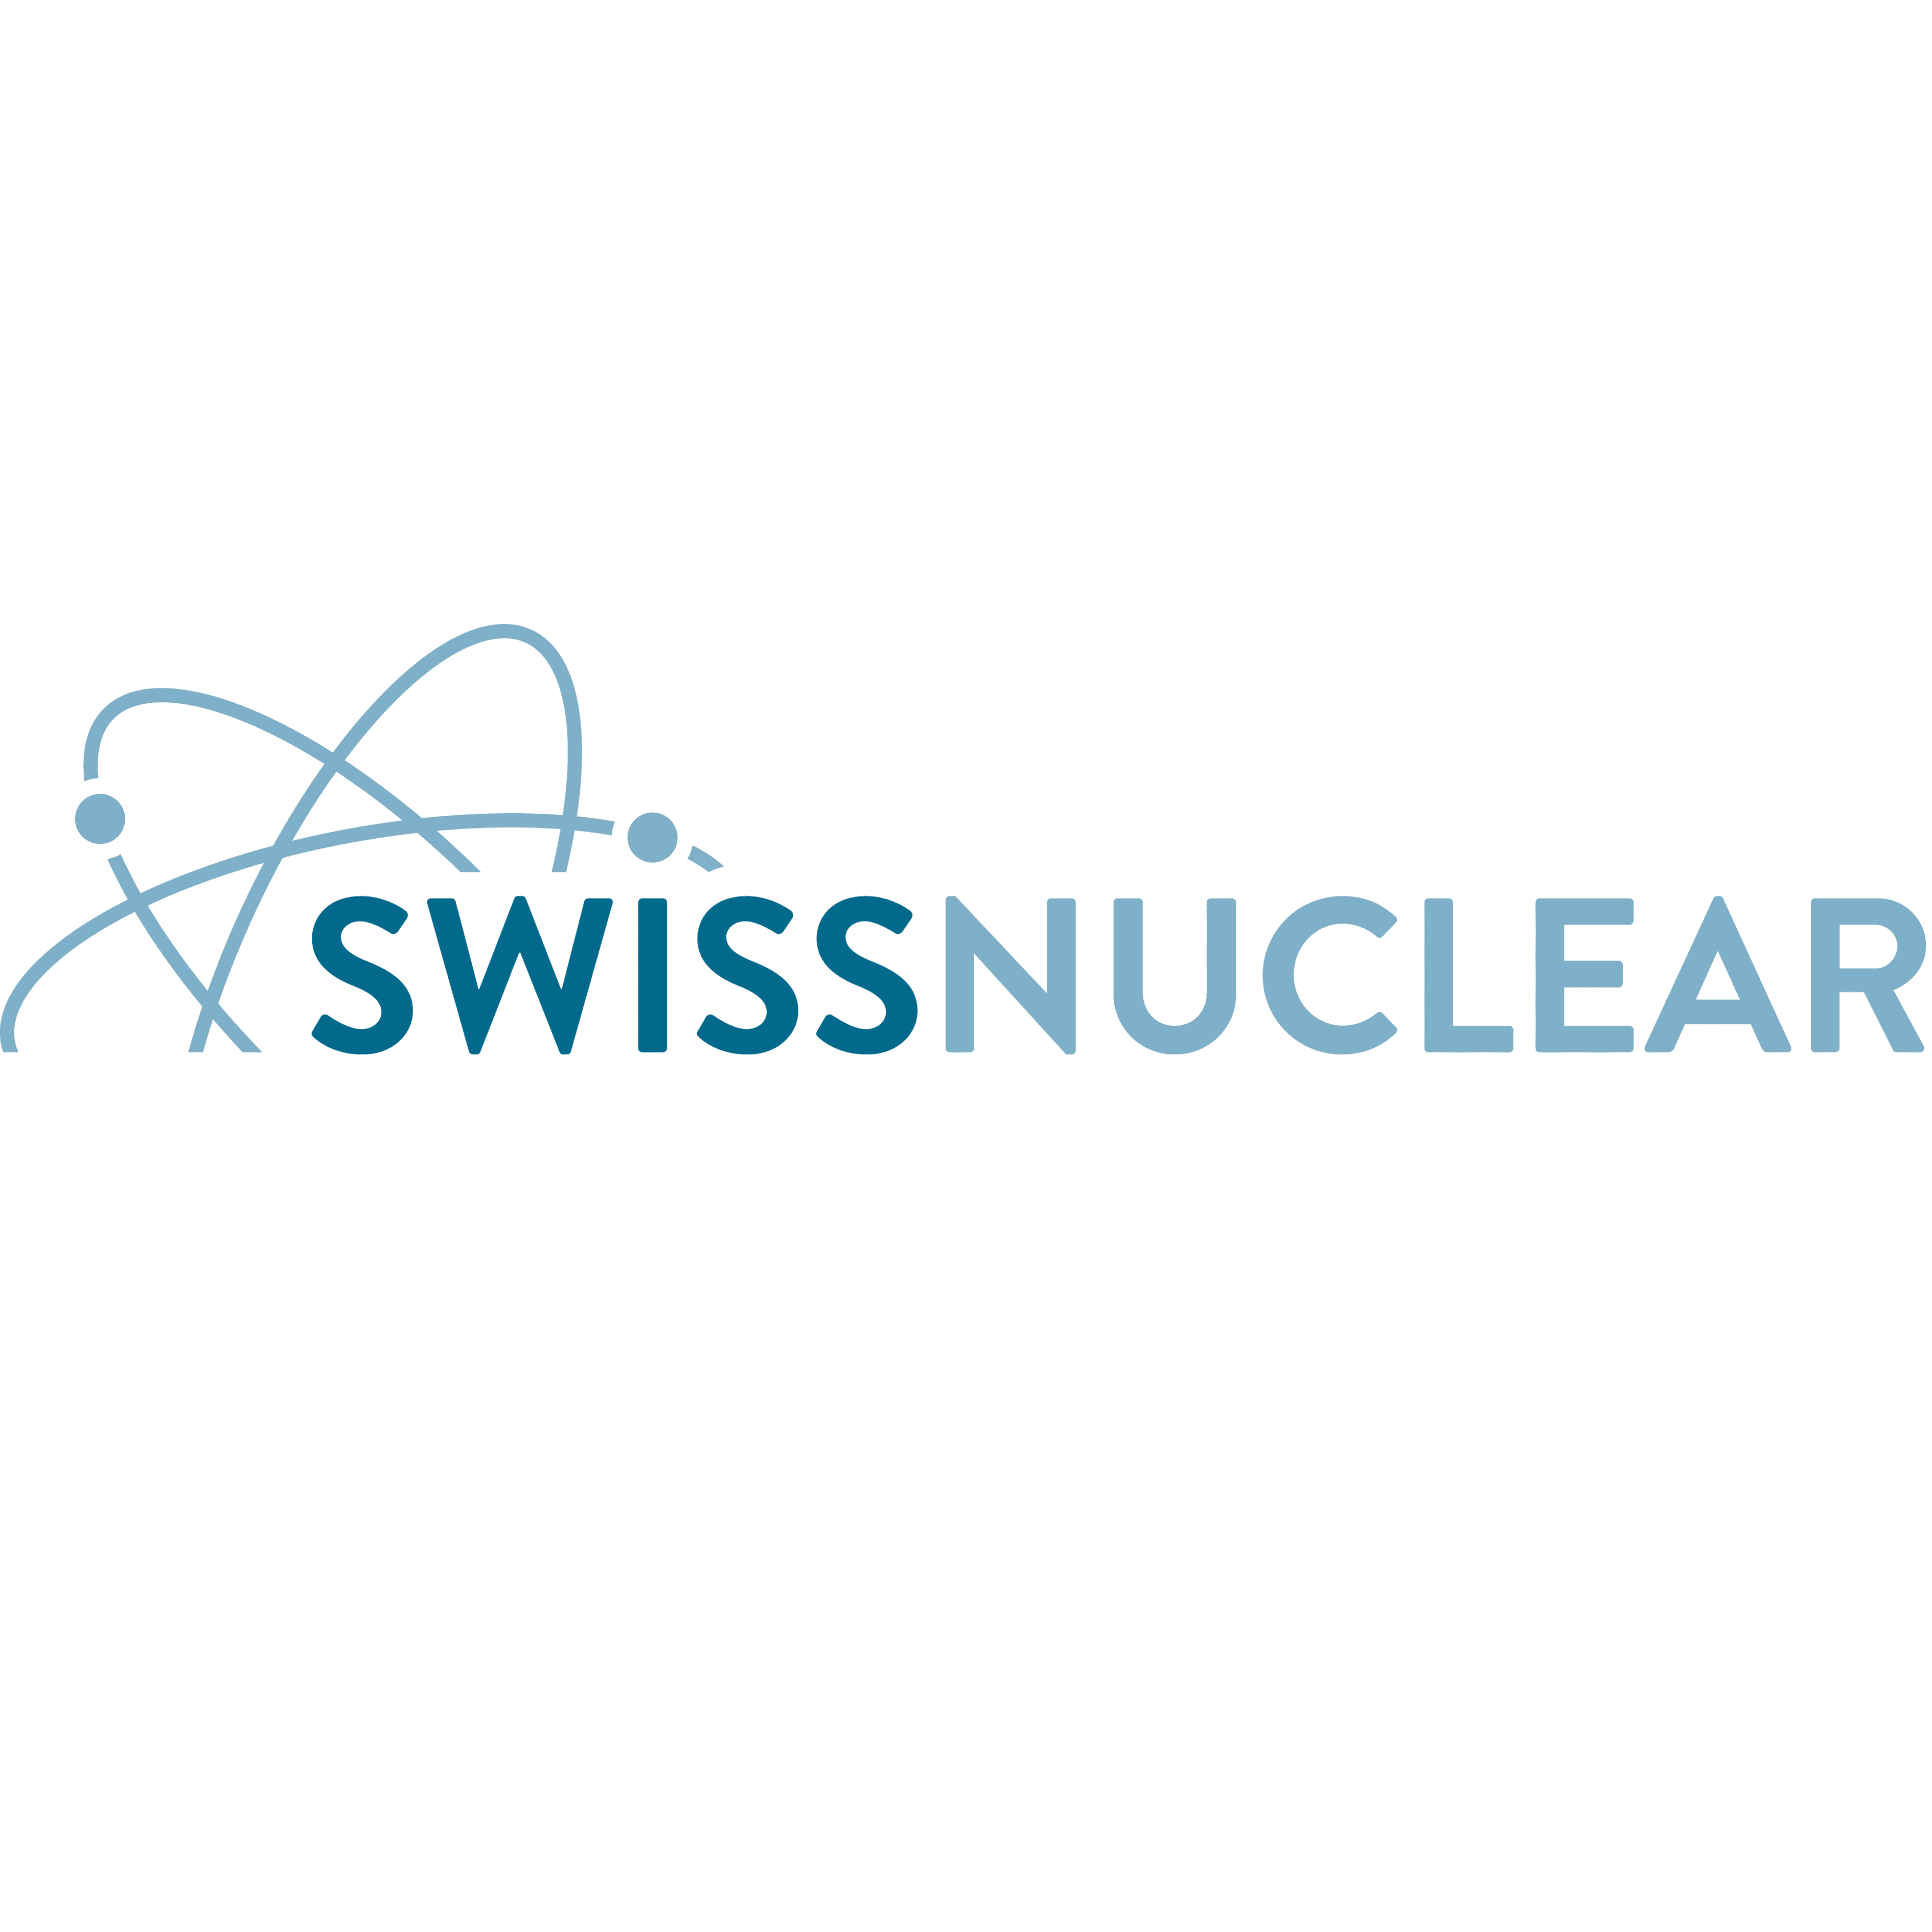 Swissnuclear Industry Perspective